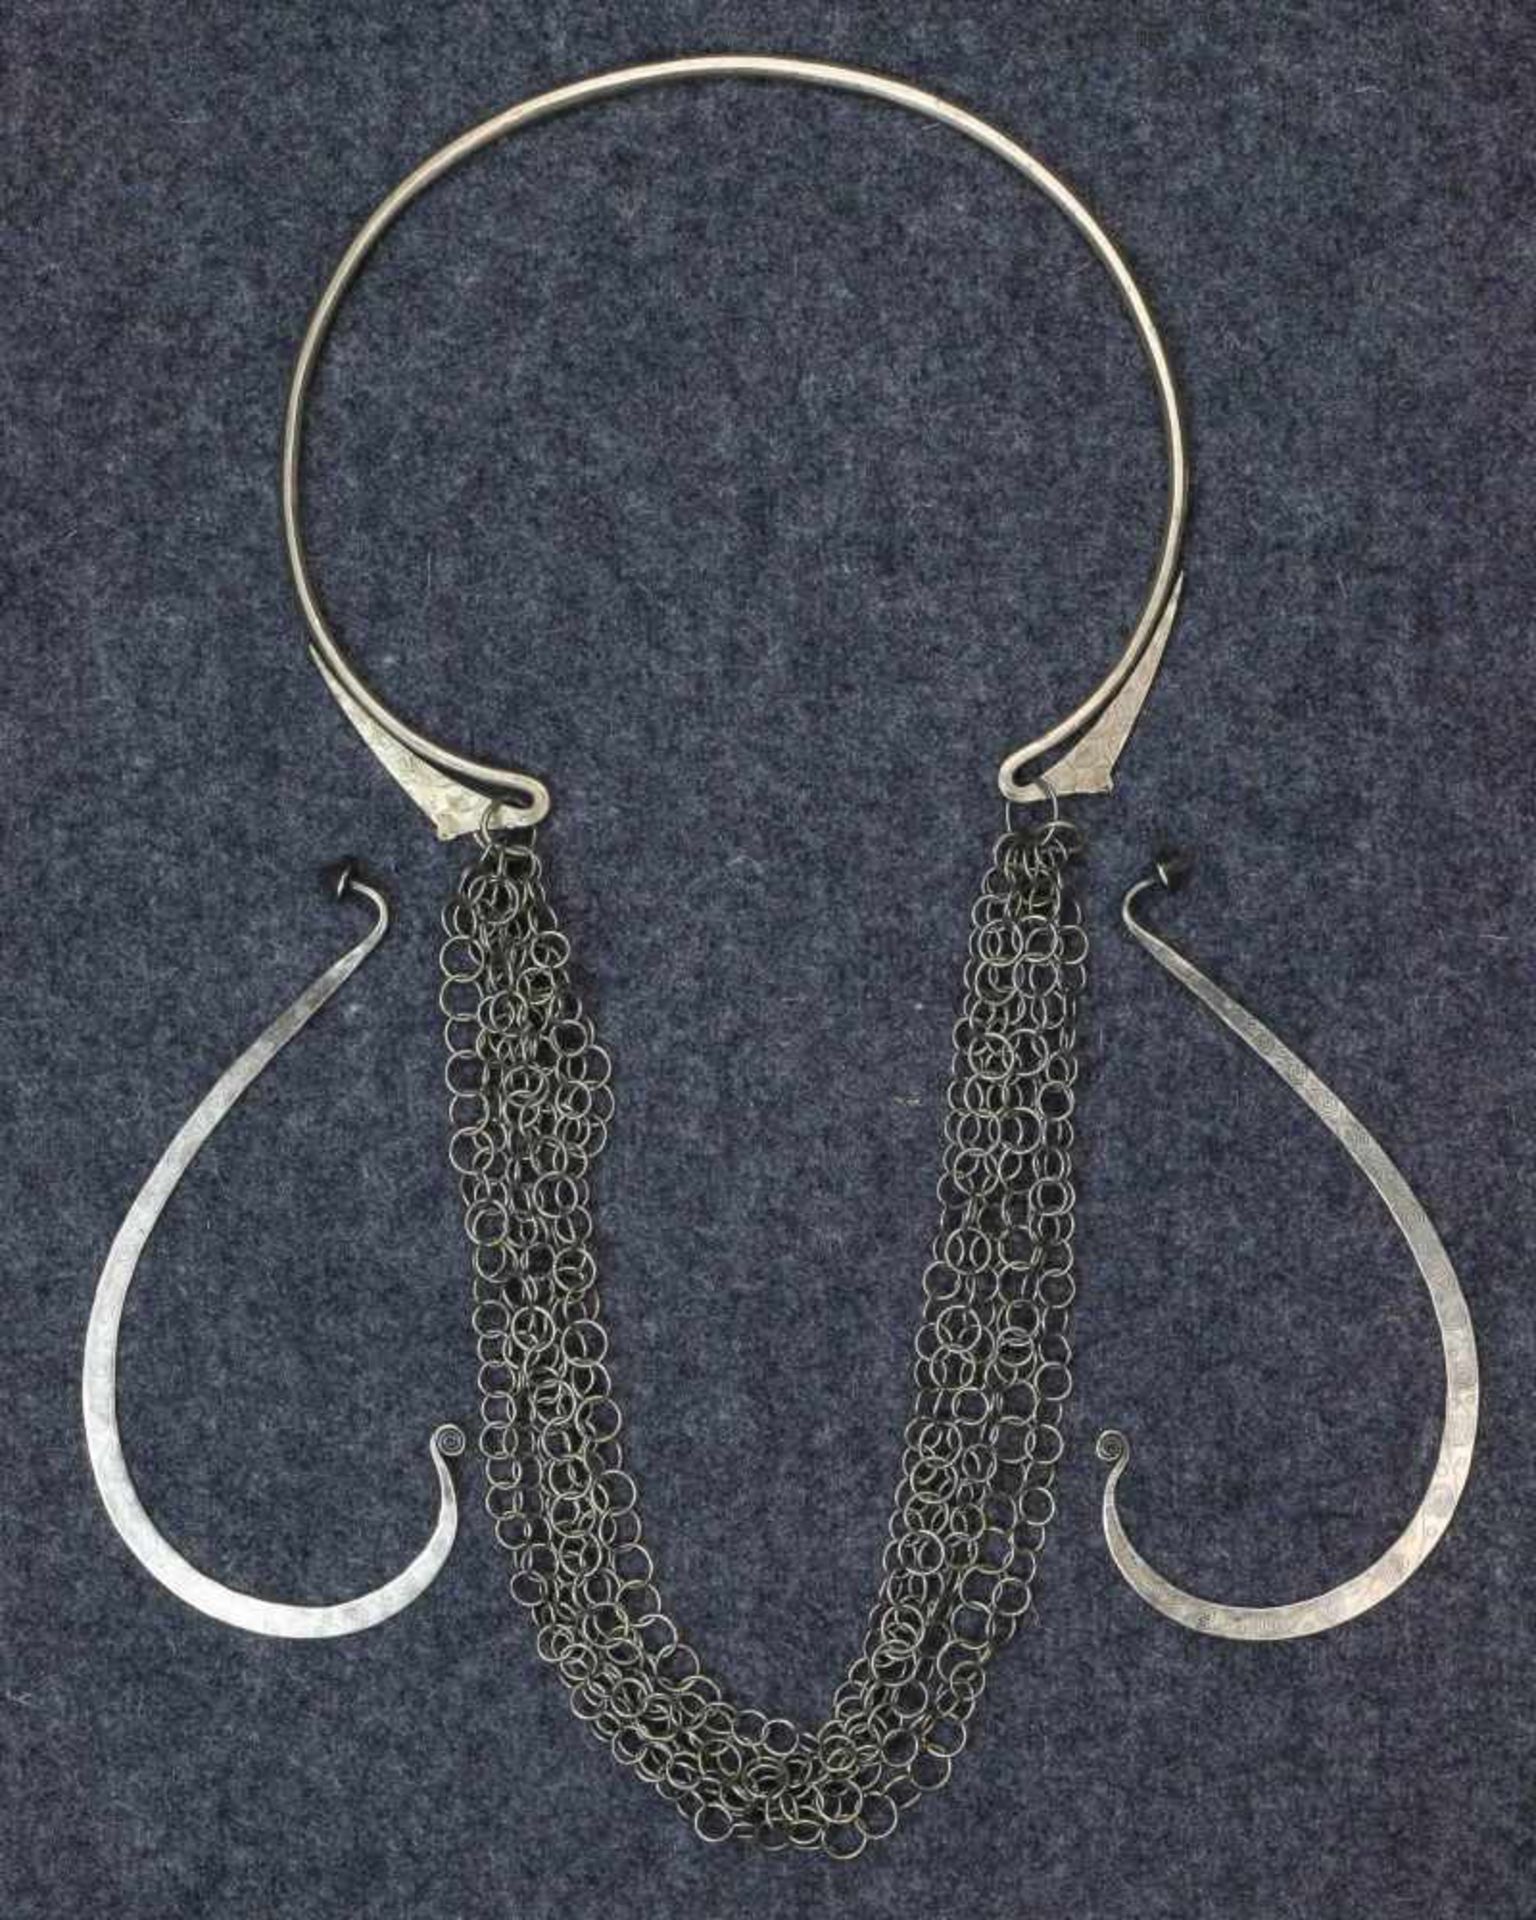 Golden Triangle, Hmong, North Vietnam, pair of silver earringsengraved with spiral motif. Herewith a